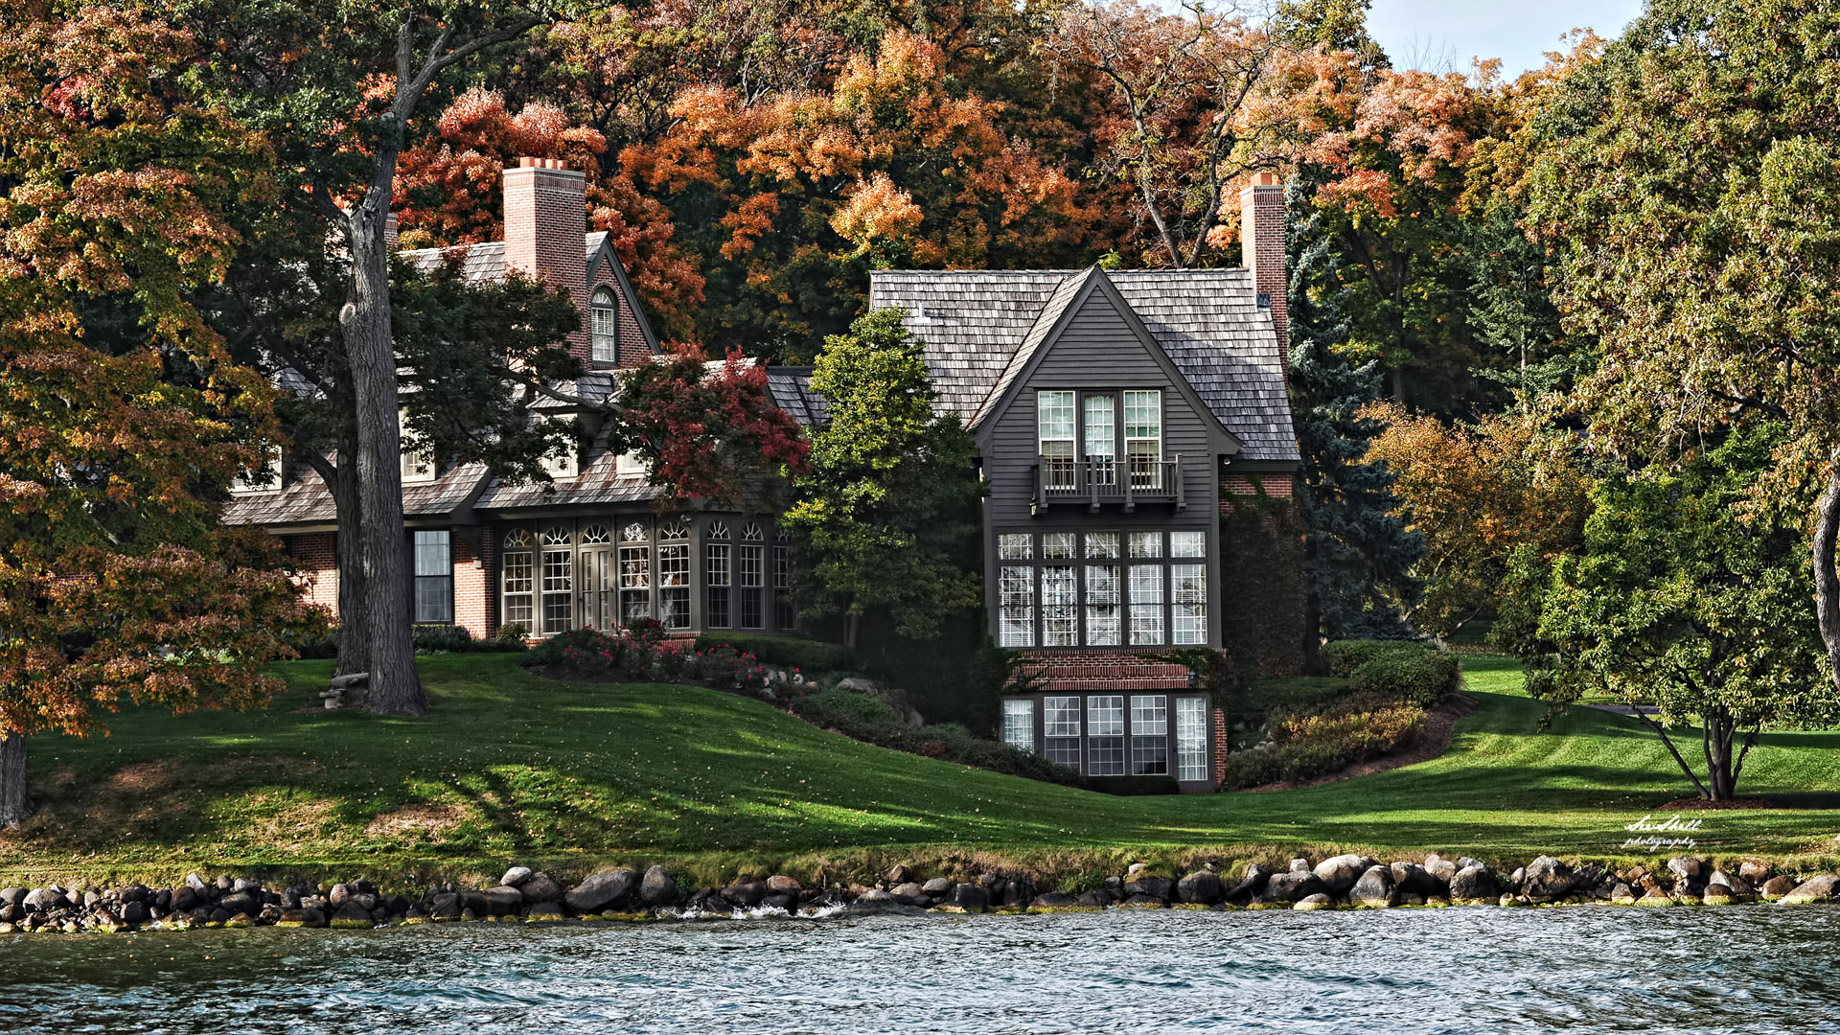 Wrigley Estate Lake Geneva – 5 of Wisconsin’s Historically Significant Grand Mansions and Premier Luxury Estates